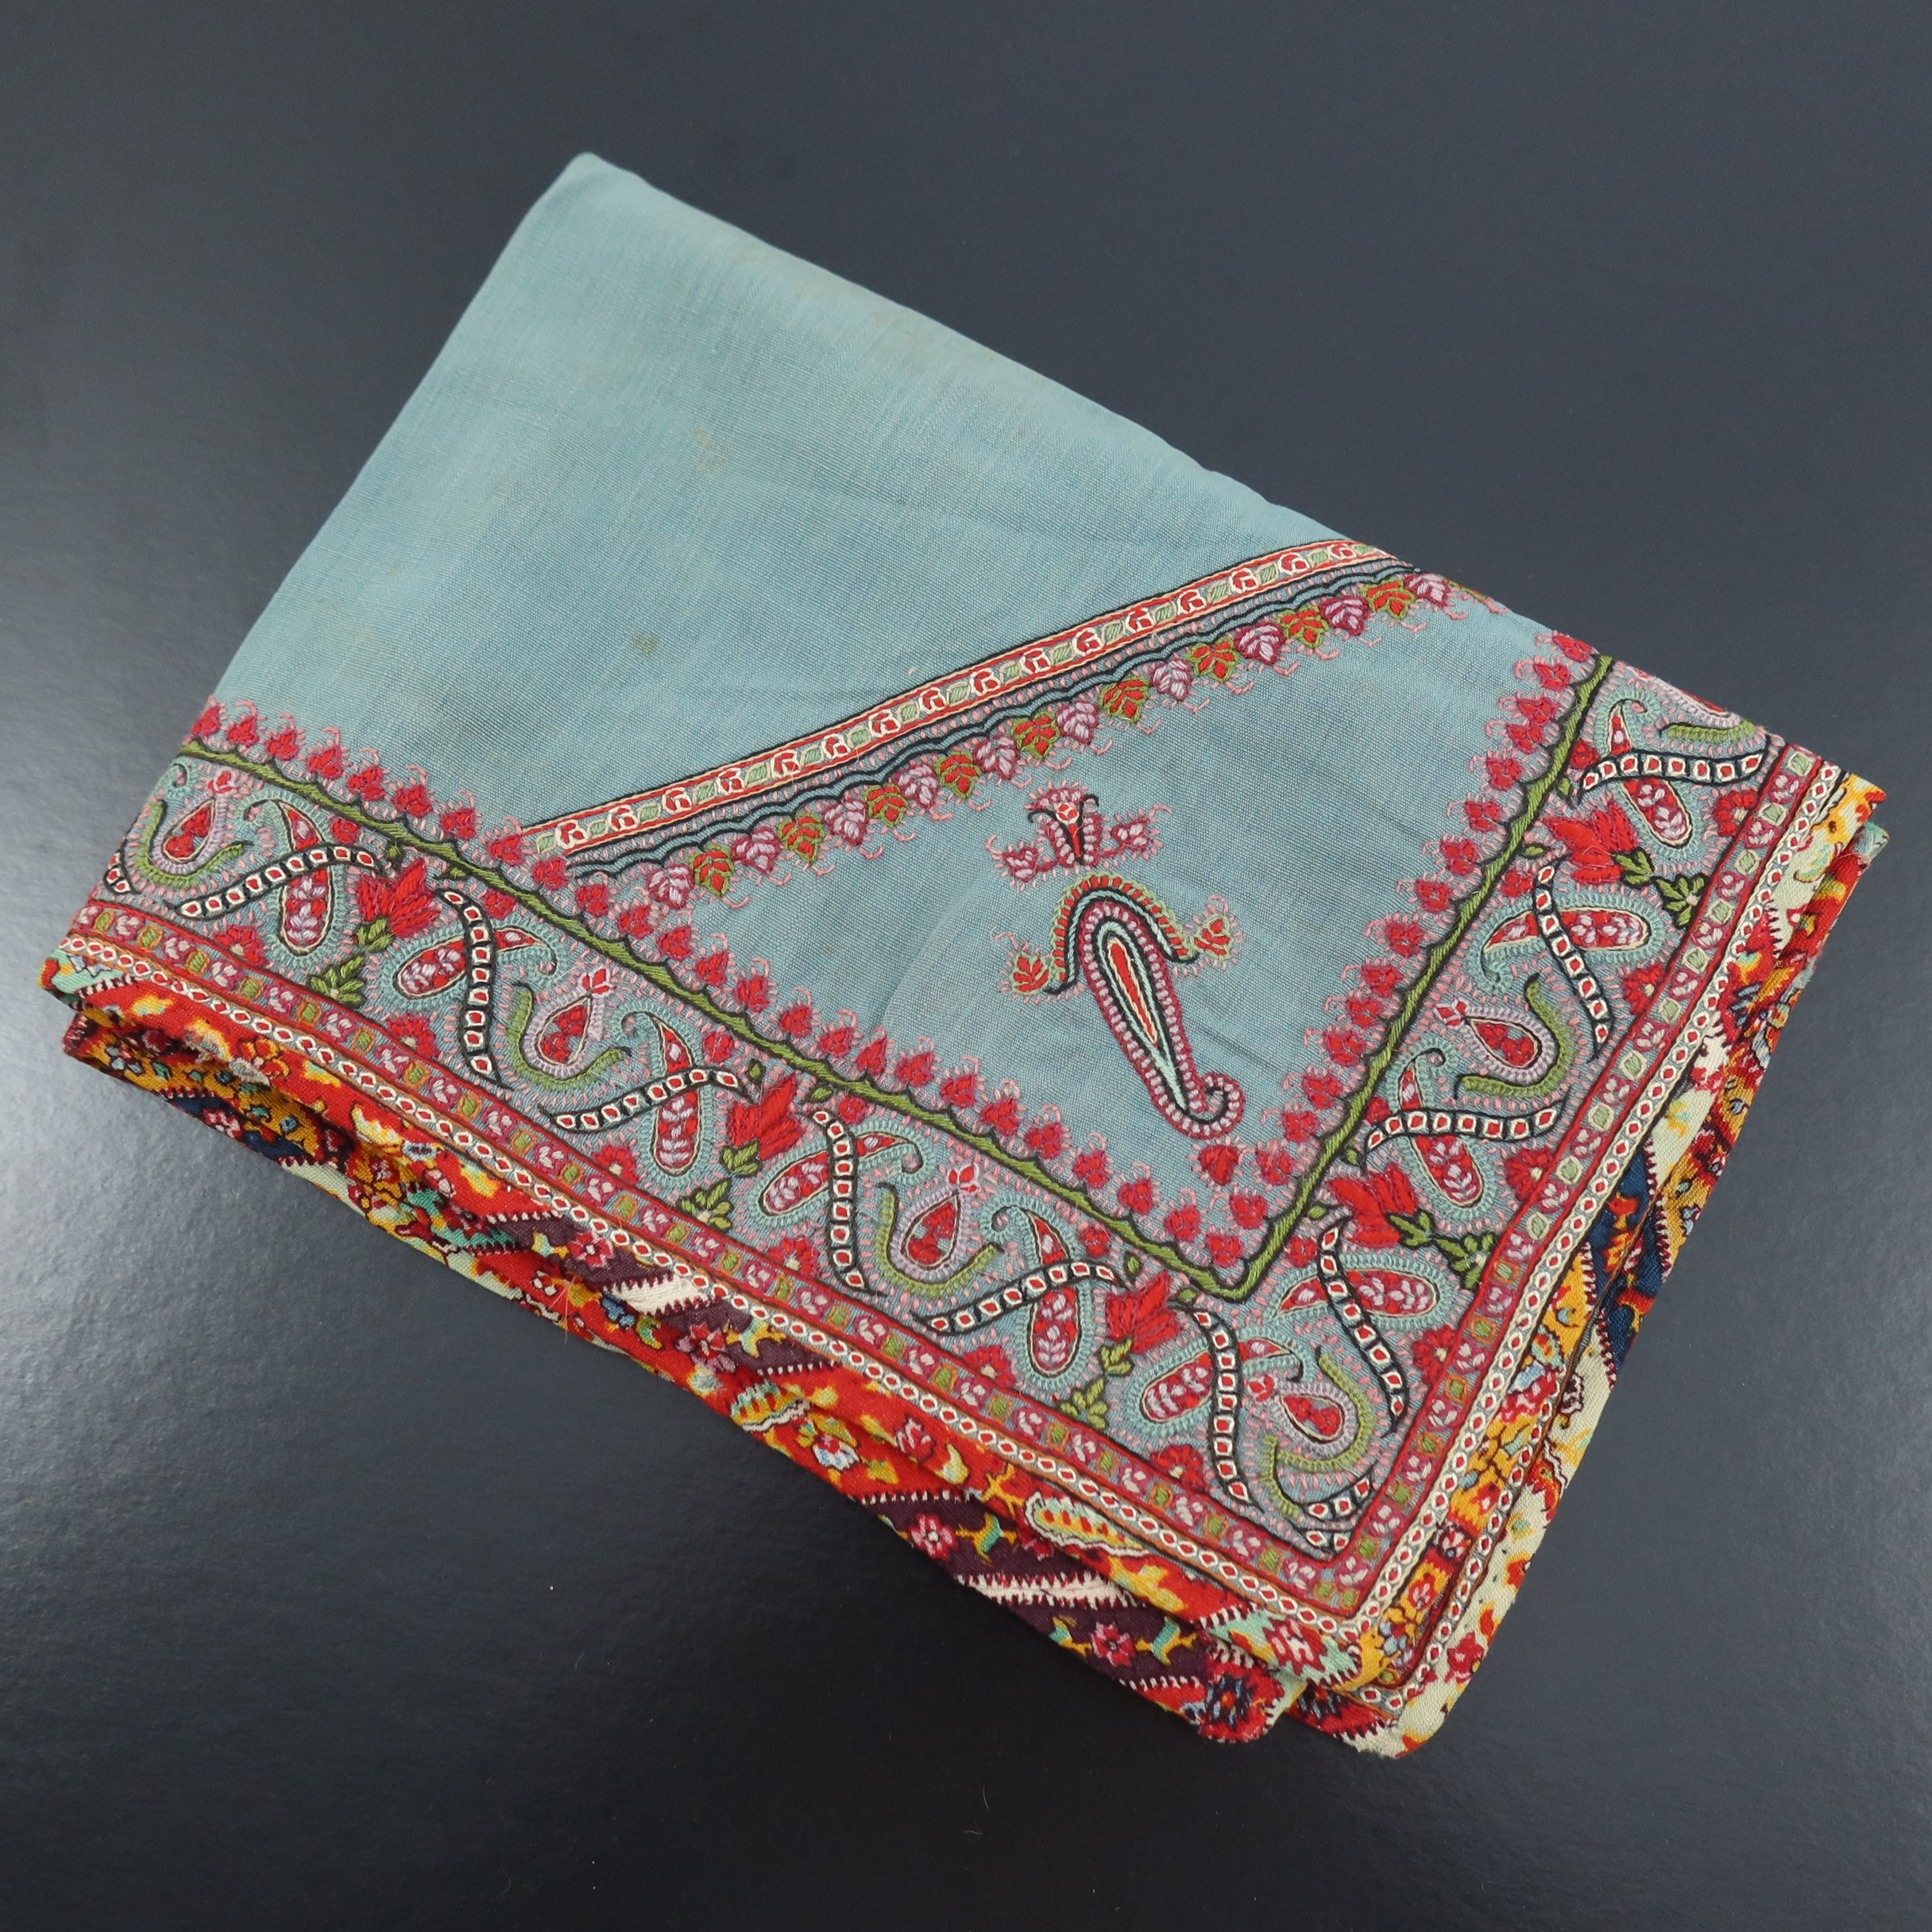 A finely embroidered rectangular cover, probably Persian, early 19th century, worked on a light turq - Image 3 of 3